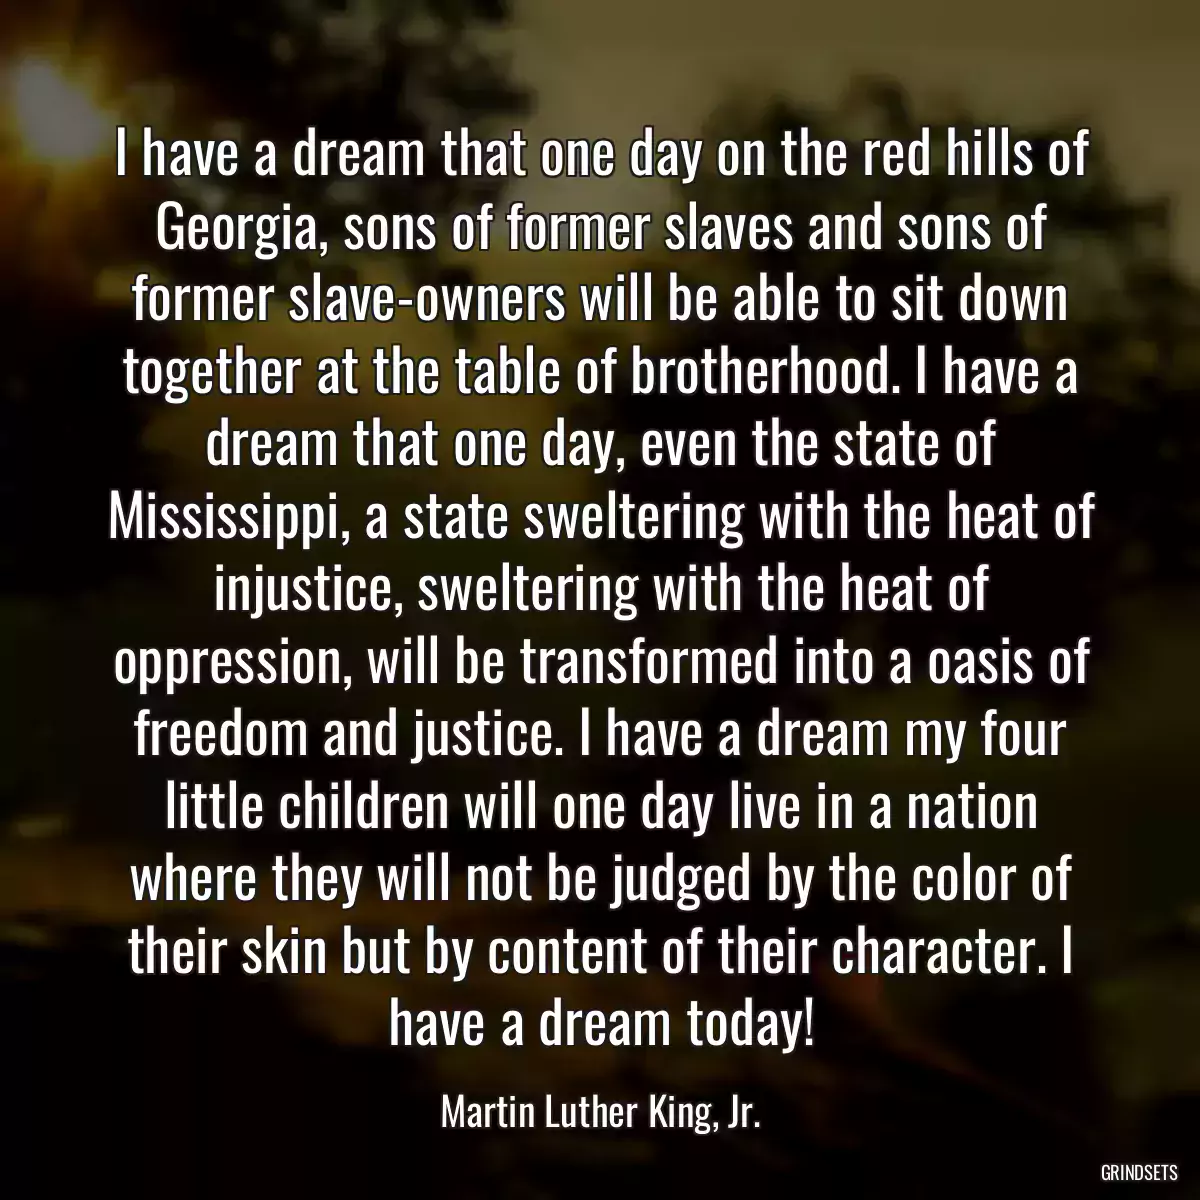 I have a dream that one day on the red hills of Georgia, sons of former slaves and sons of former slave-owners will be able to sit down together at the table of brotherhood. I have a dream that one day, even the state of Mississippi, a state sweltering with the heat of injustice, sweltering with the heat of oppression, will be transformed into a oasis of freedom and justice. I have a dream my four little children will one day live in a nation where they will not be judged by the color of their skin but by content of their character. I have a dream today!